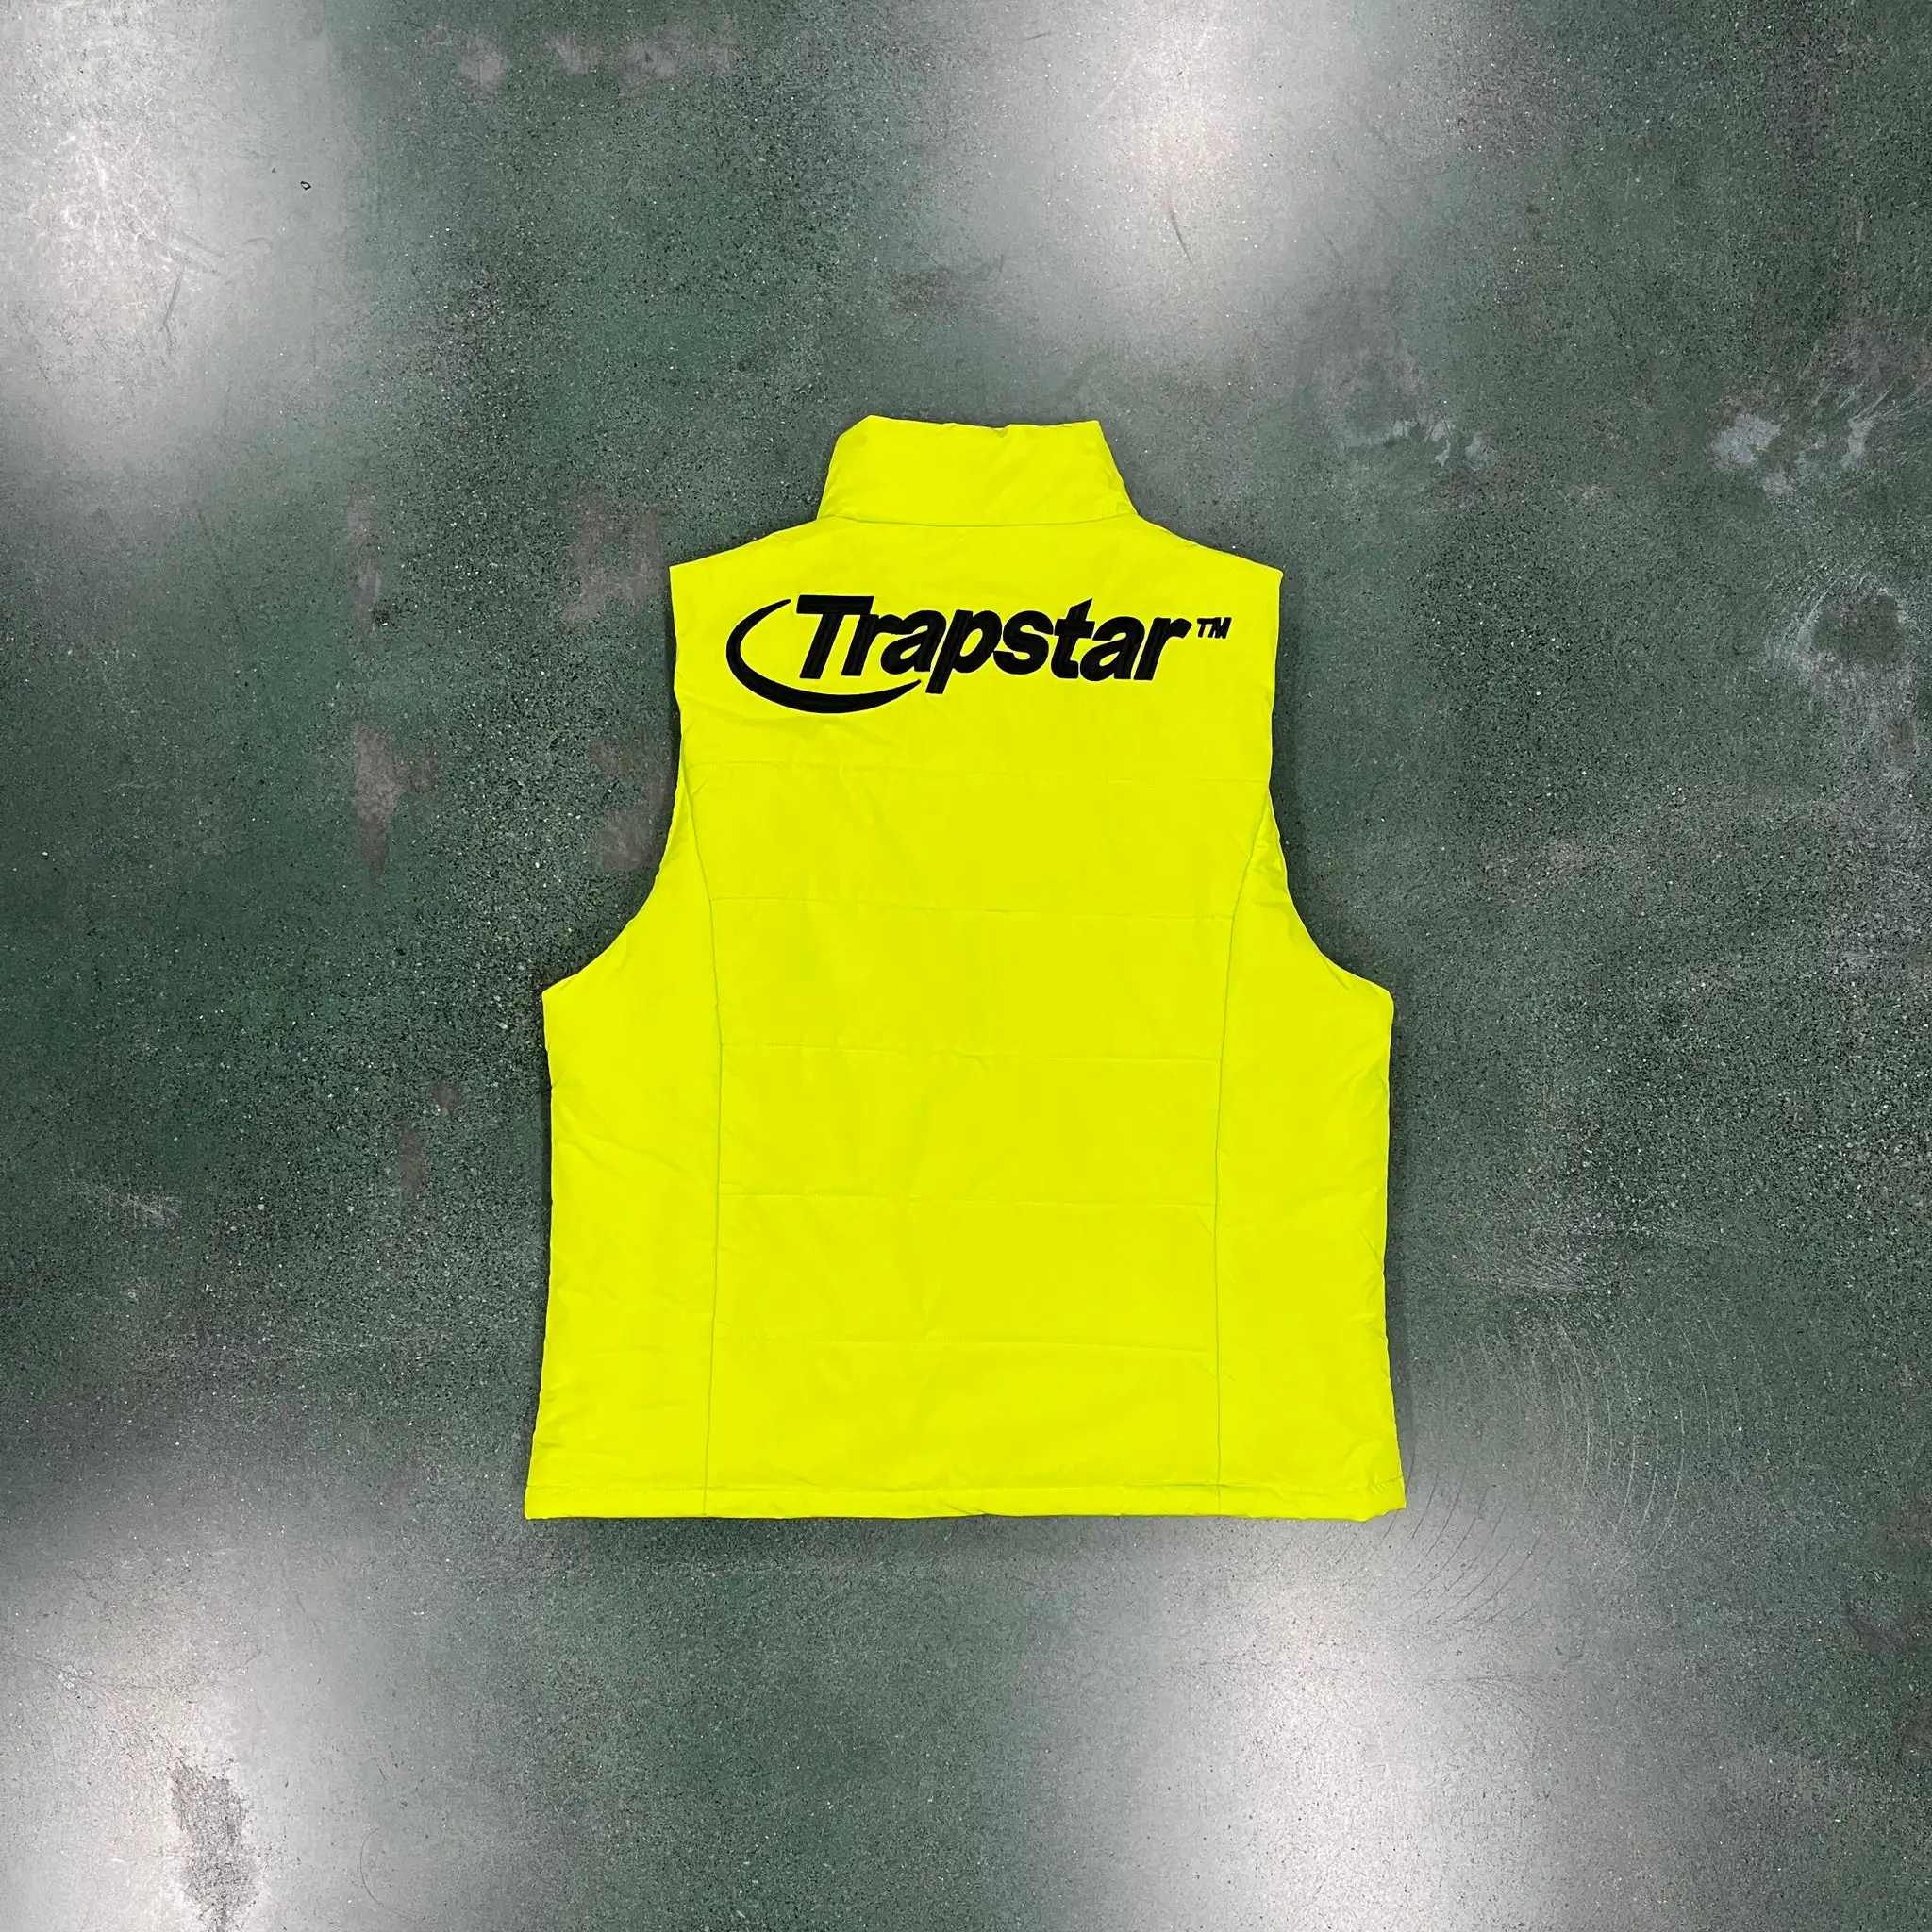 In Stock Trapstar London Jacket Men's Winter Warm Hyperdrive Gilet Yellow 1:1 Top Quality Embroidered Men Trapstar Vest